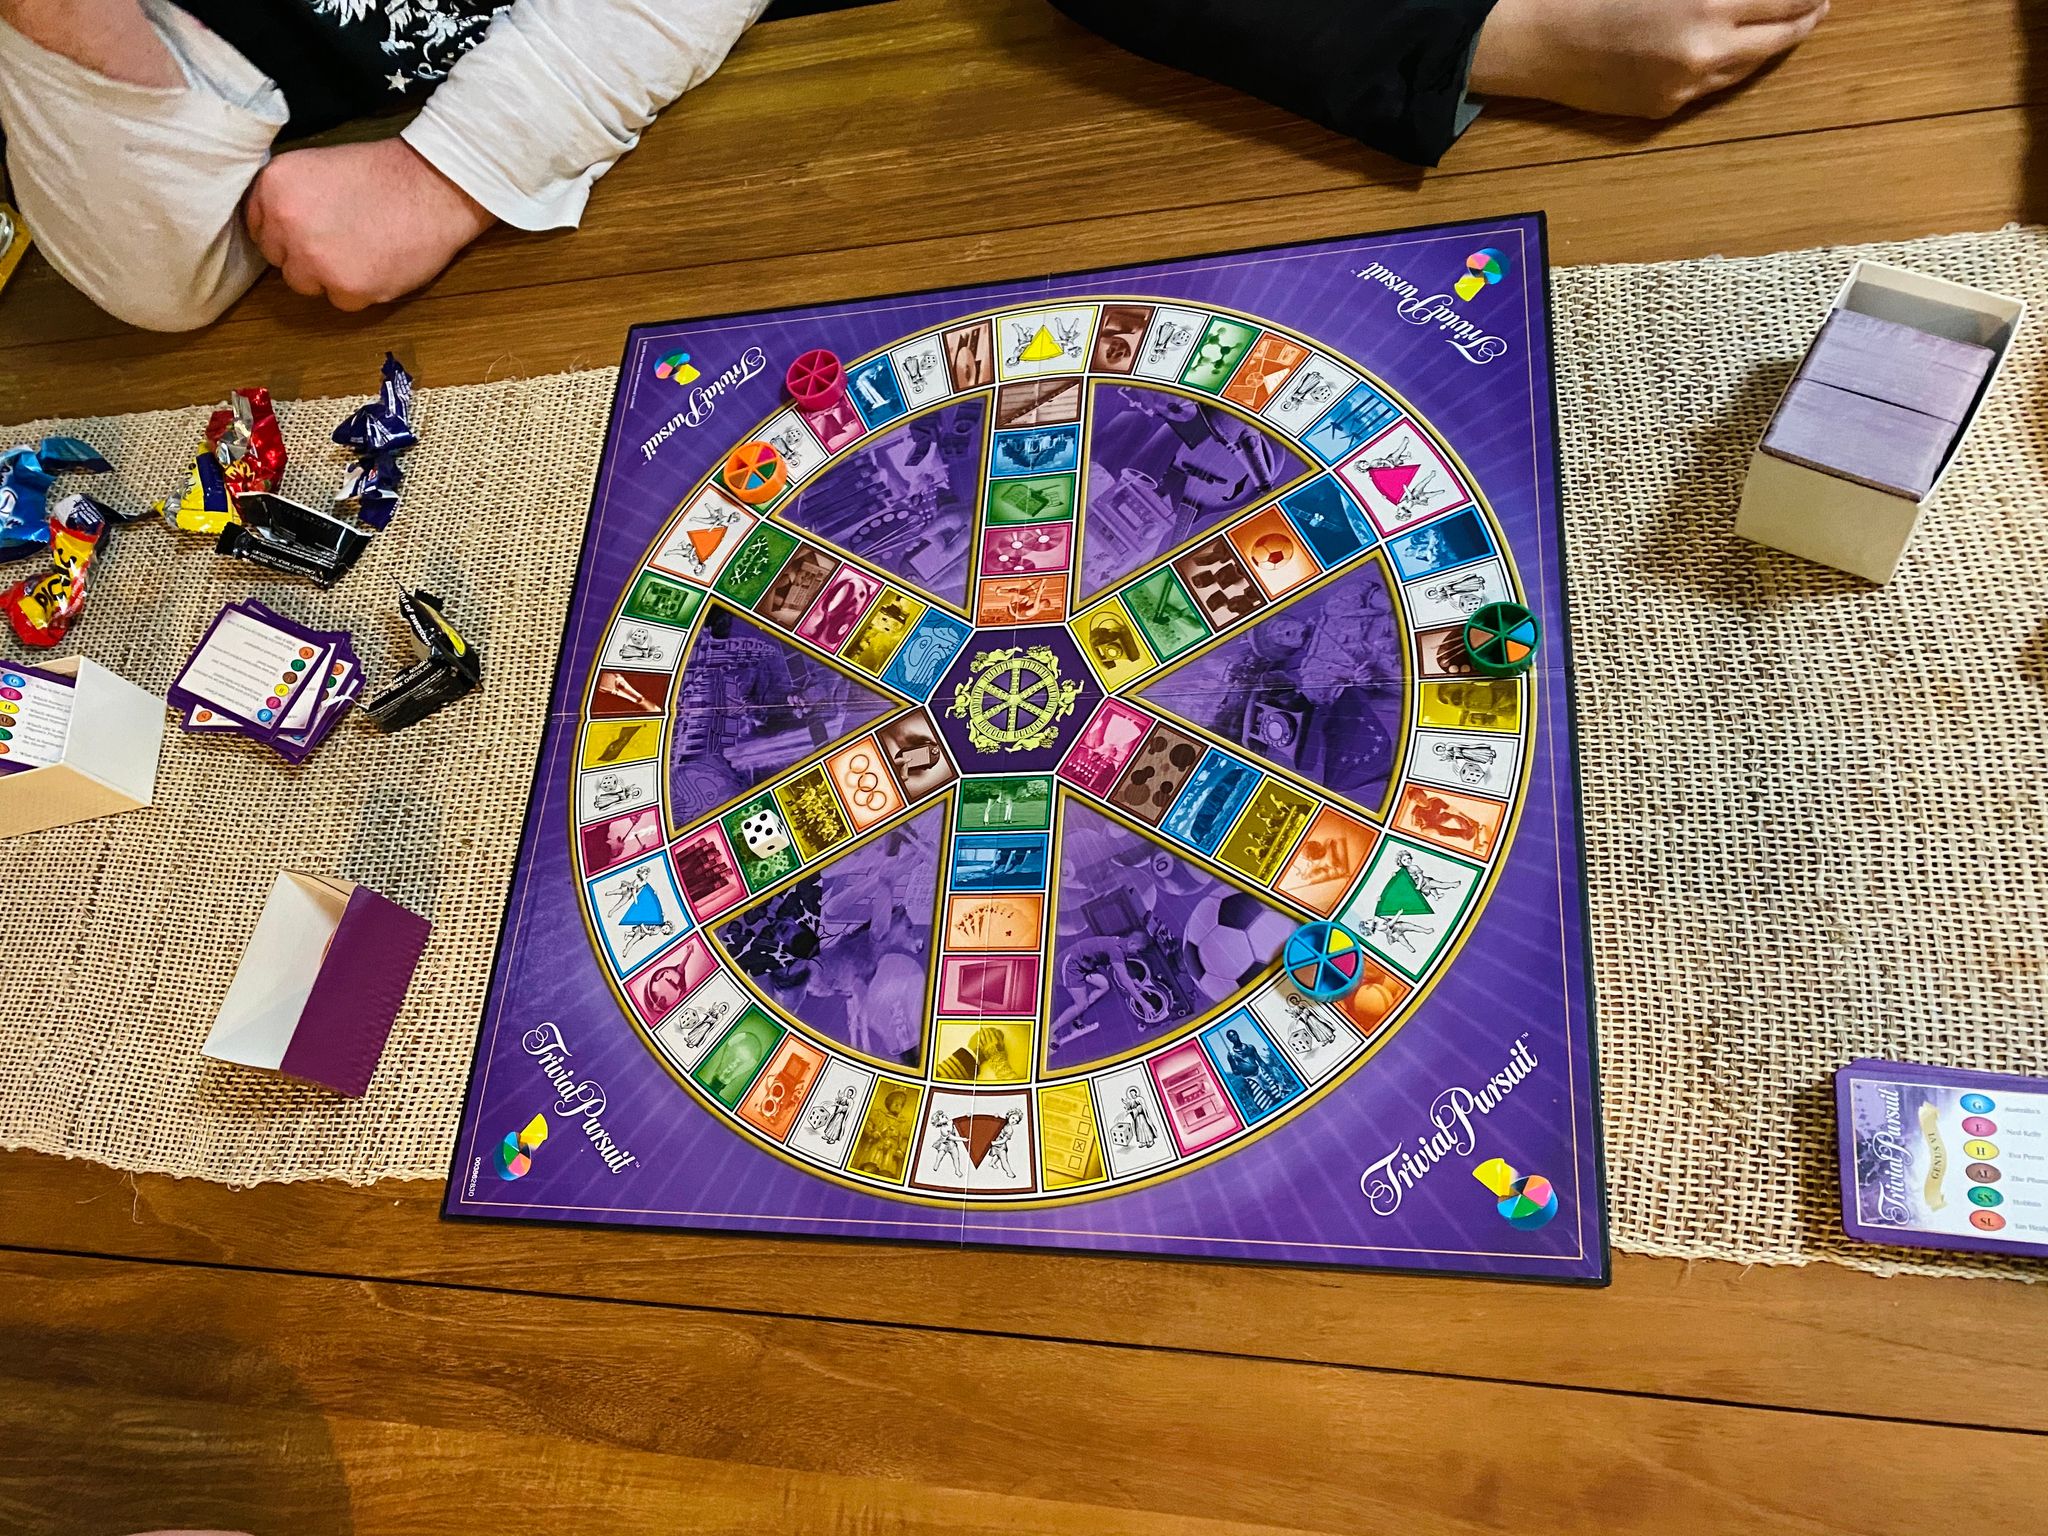 A photo of a Trivial Pursuit board and pieces on a table.